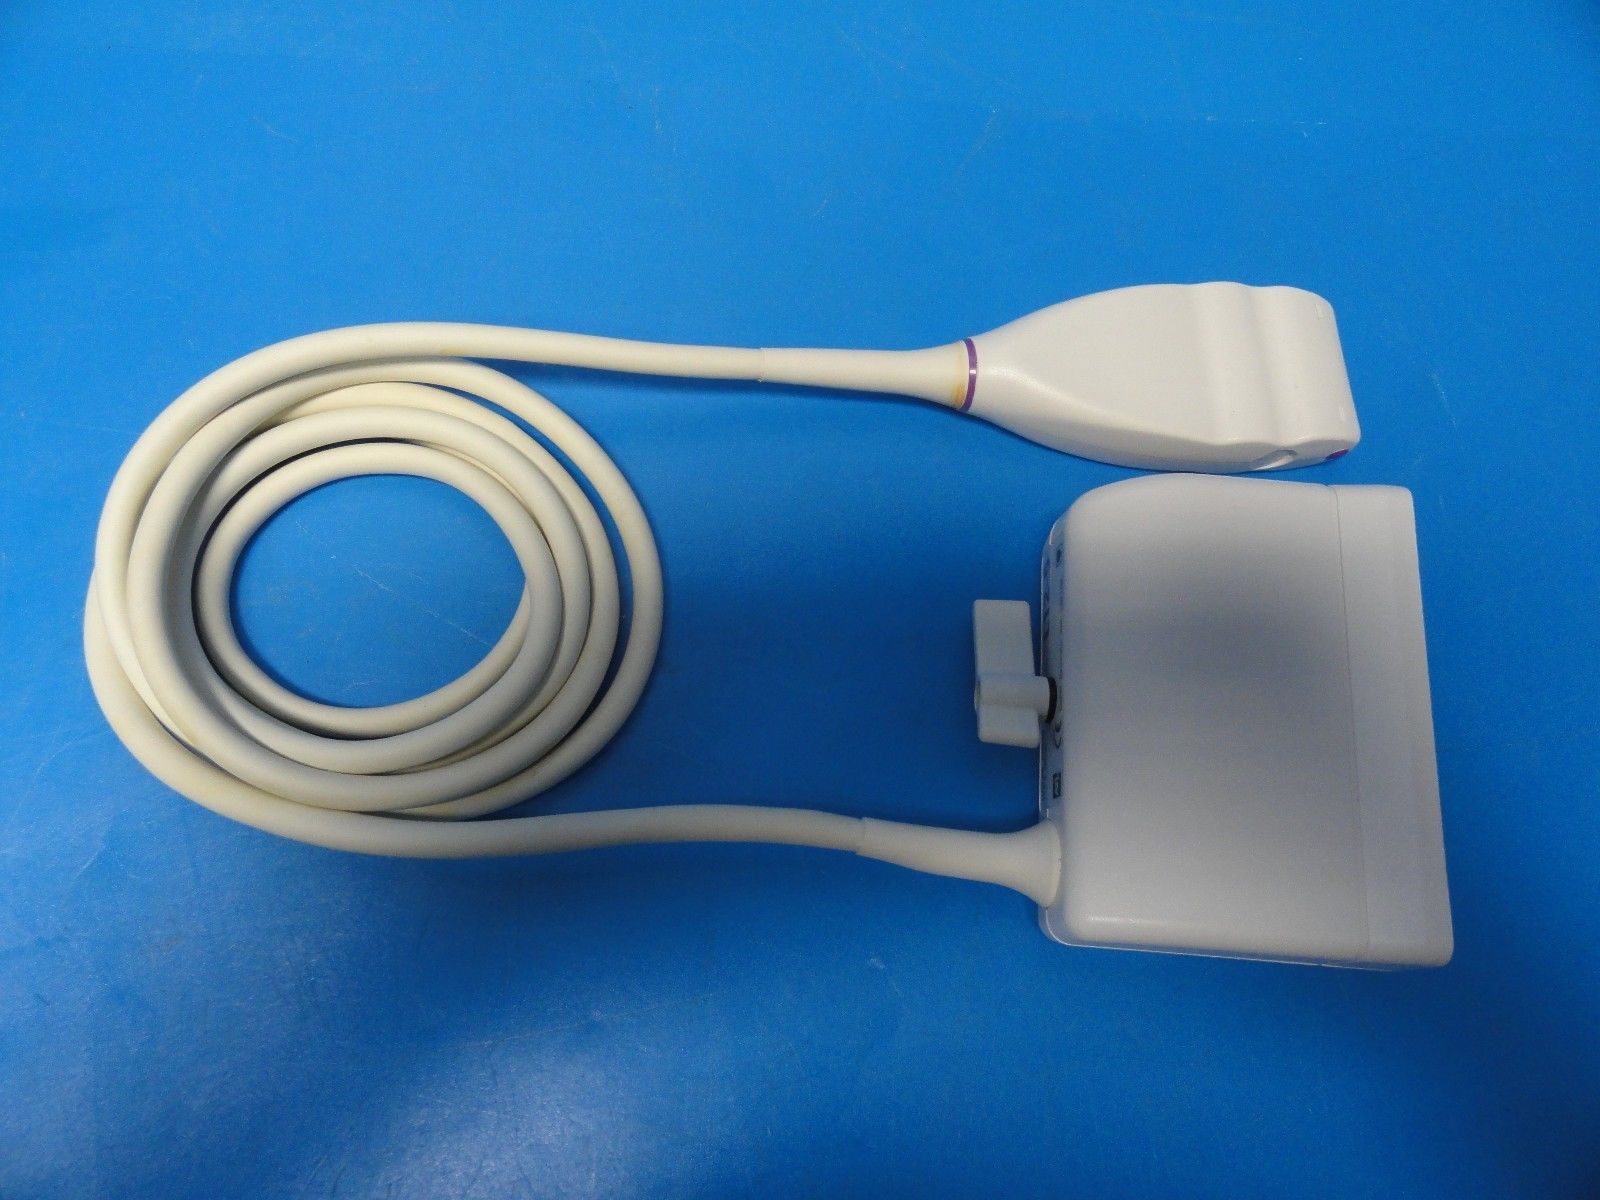 2005 ATL L12-5 38MM Linear Array Probe for Vascular Small Parts Pediatric (6864) DIAGNOSTIC ULTRASOUND MACHINES FOR SALE